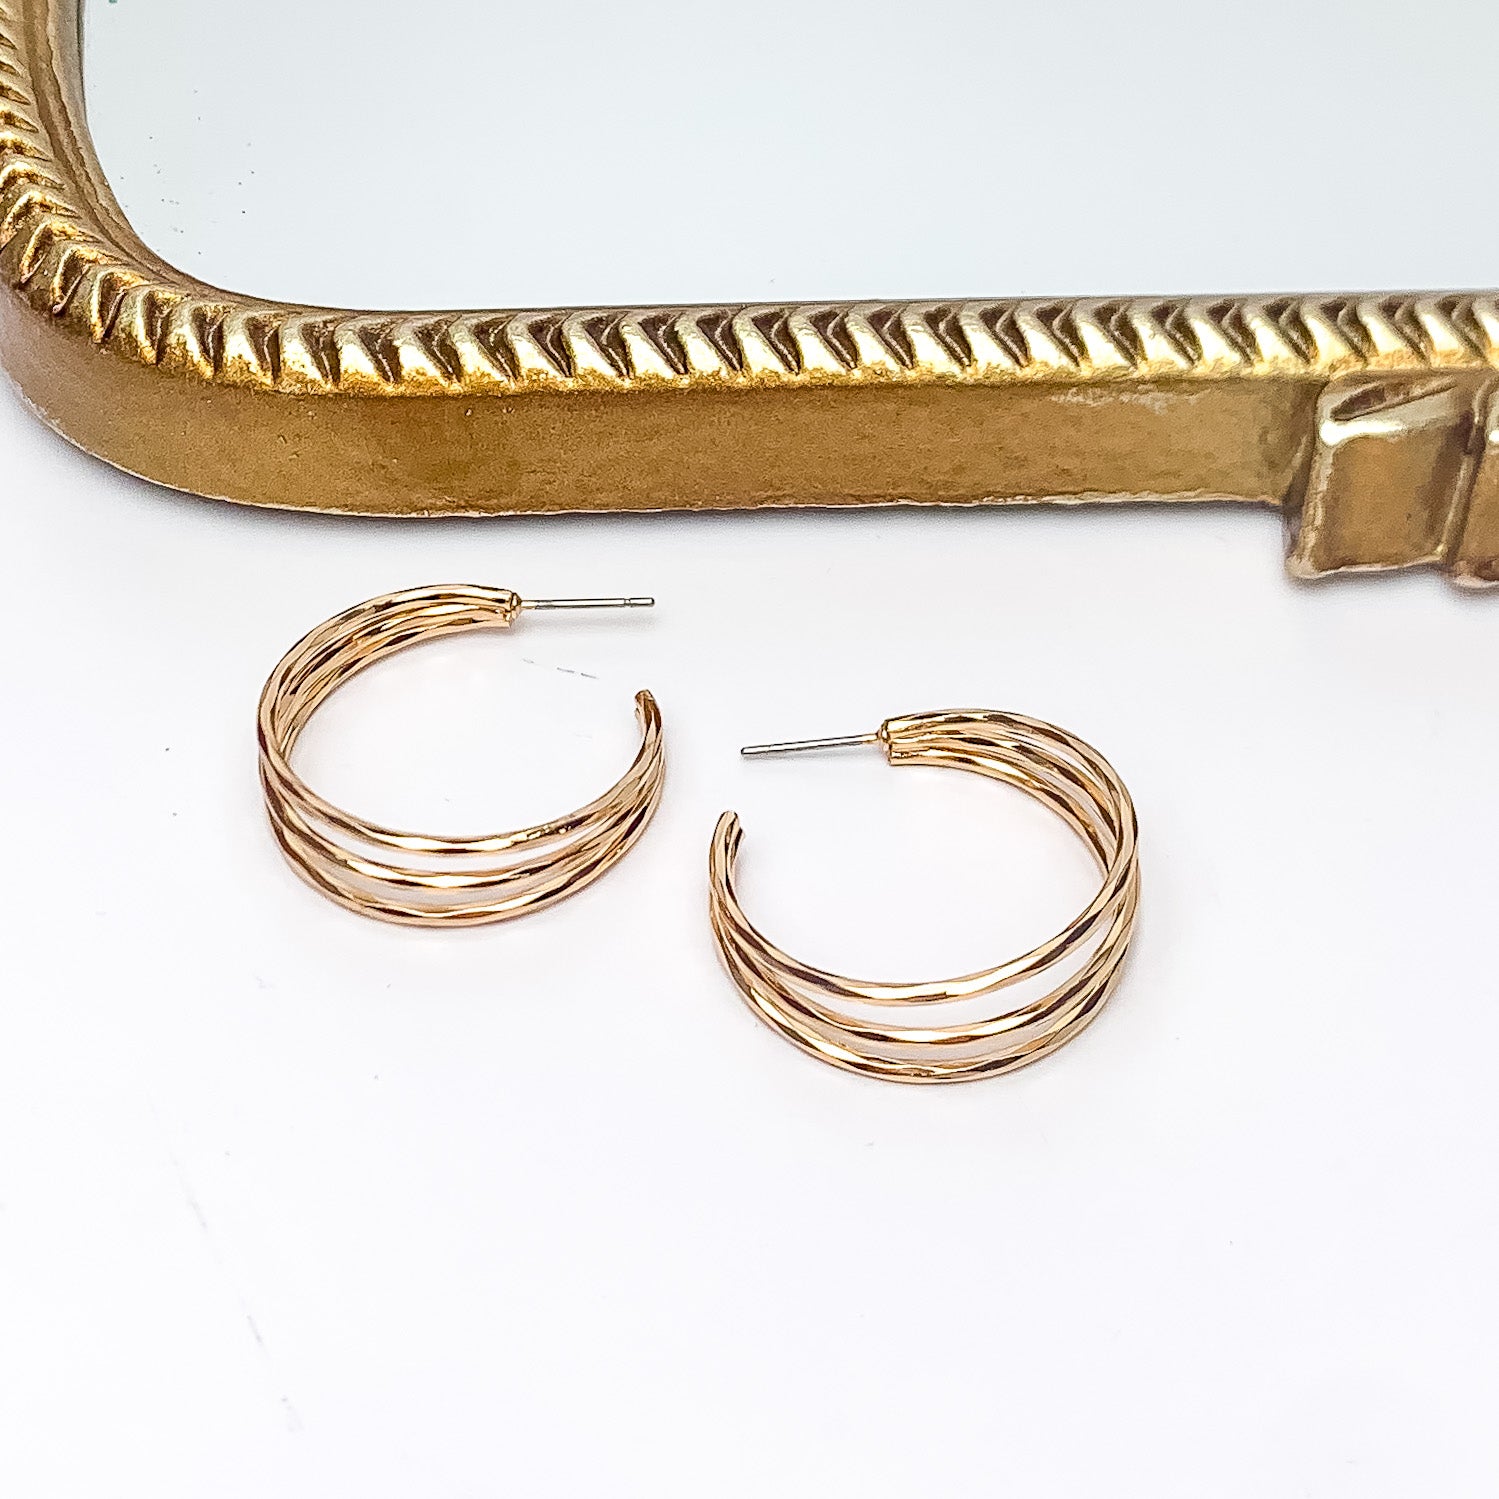 Good Karma Medium Triple Hoop Earrings in Gold Tone. Pictured on a white background with a gold frame above the earrings.